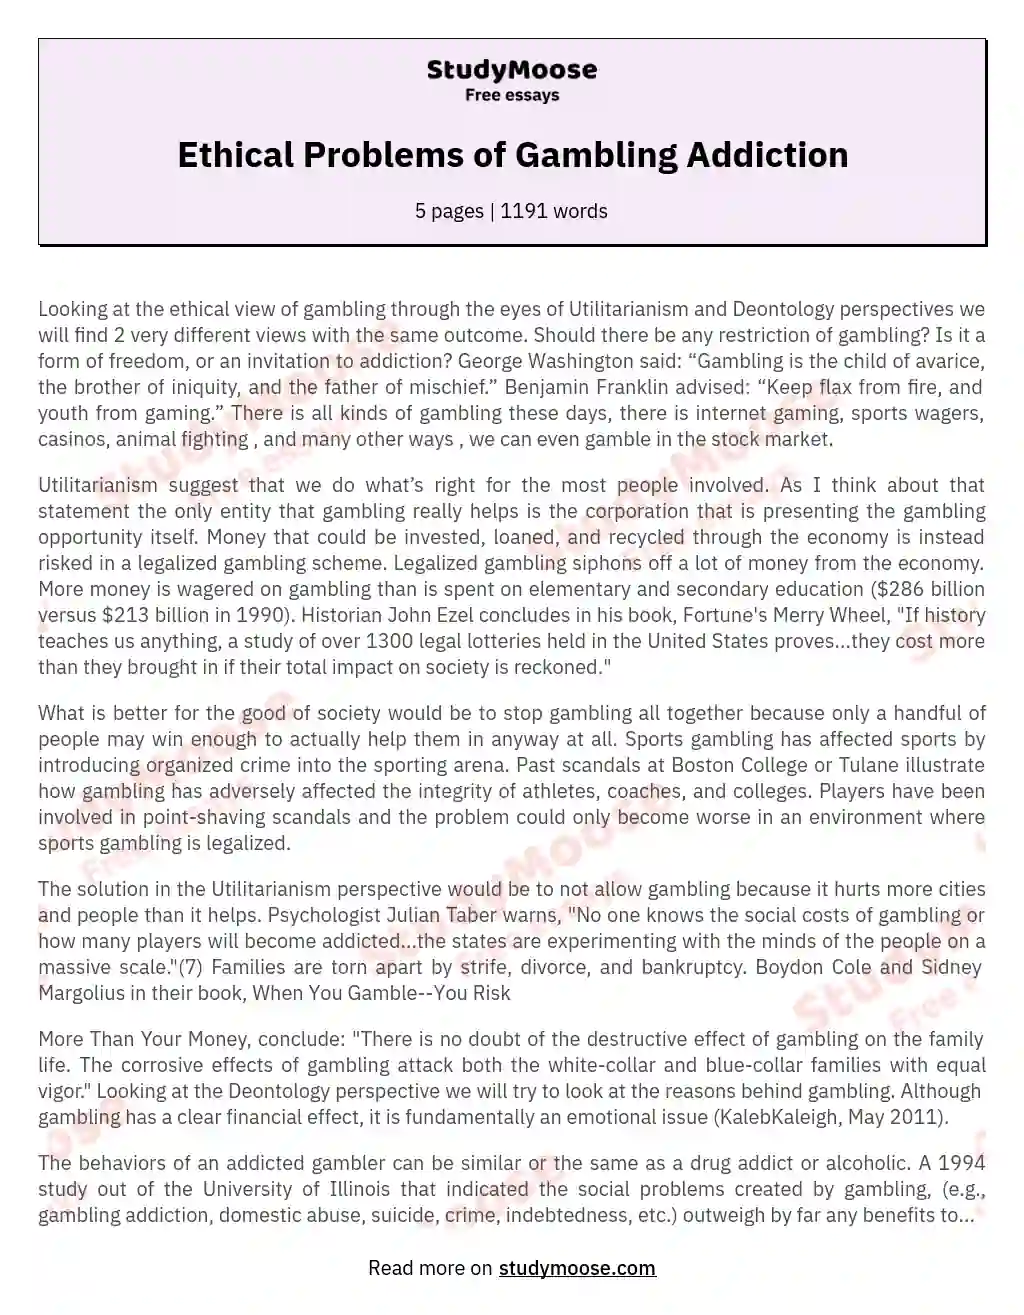 Ethical Problems of Gambling Addiction essay